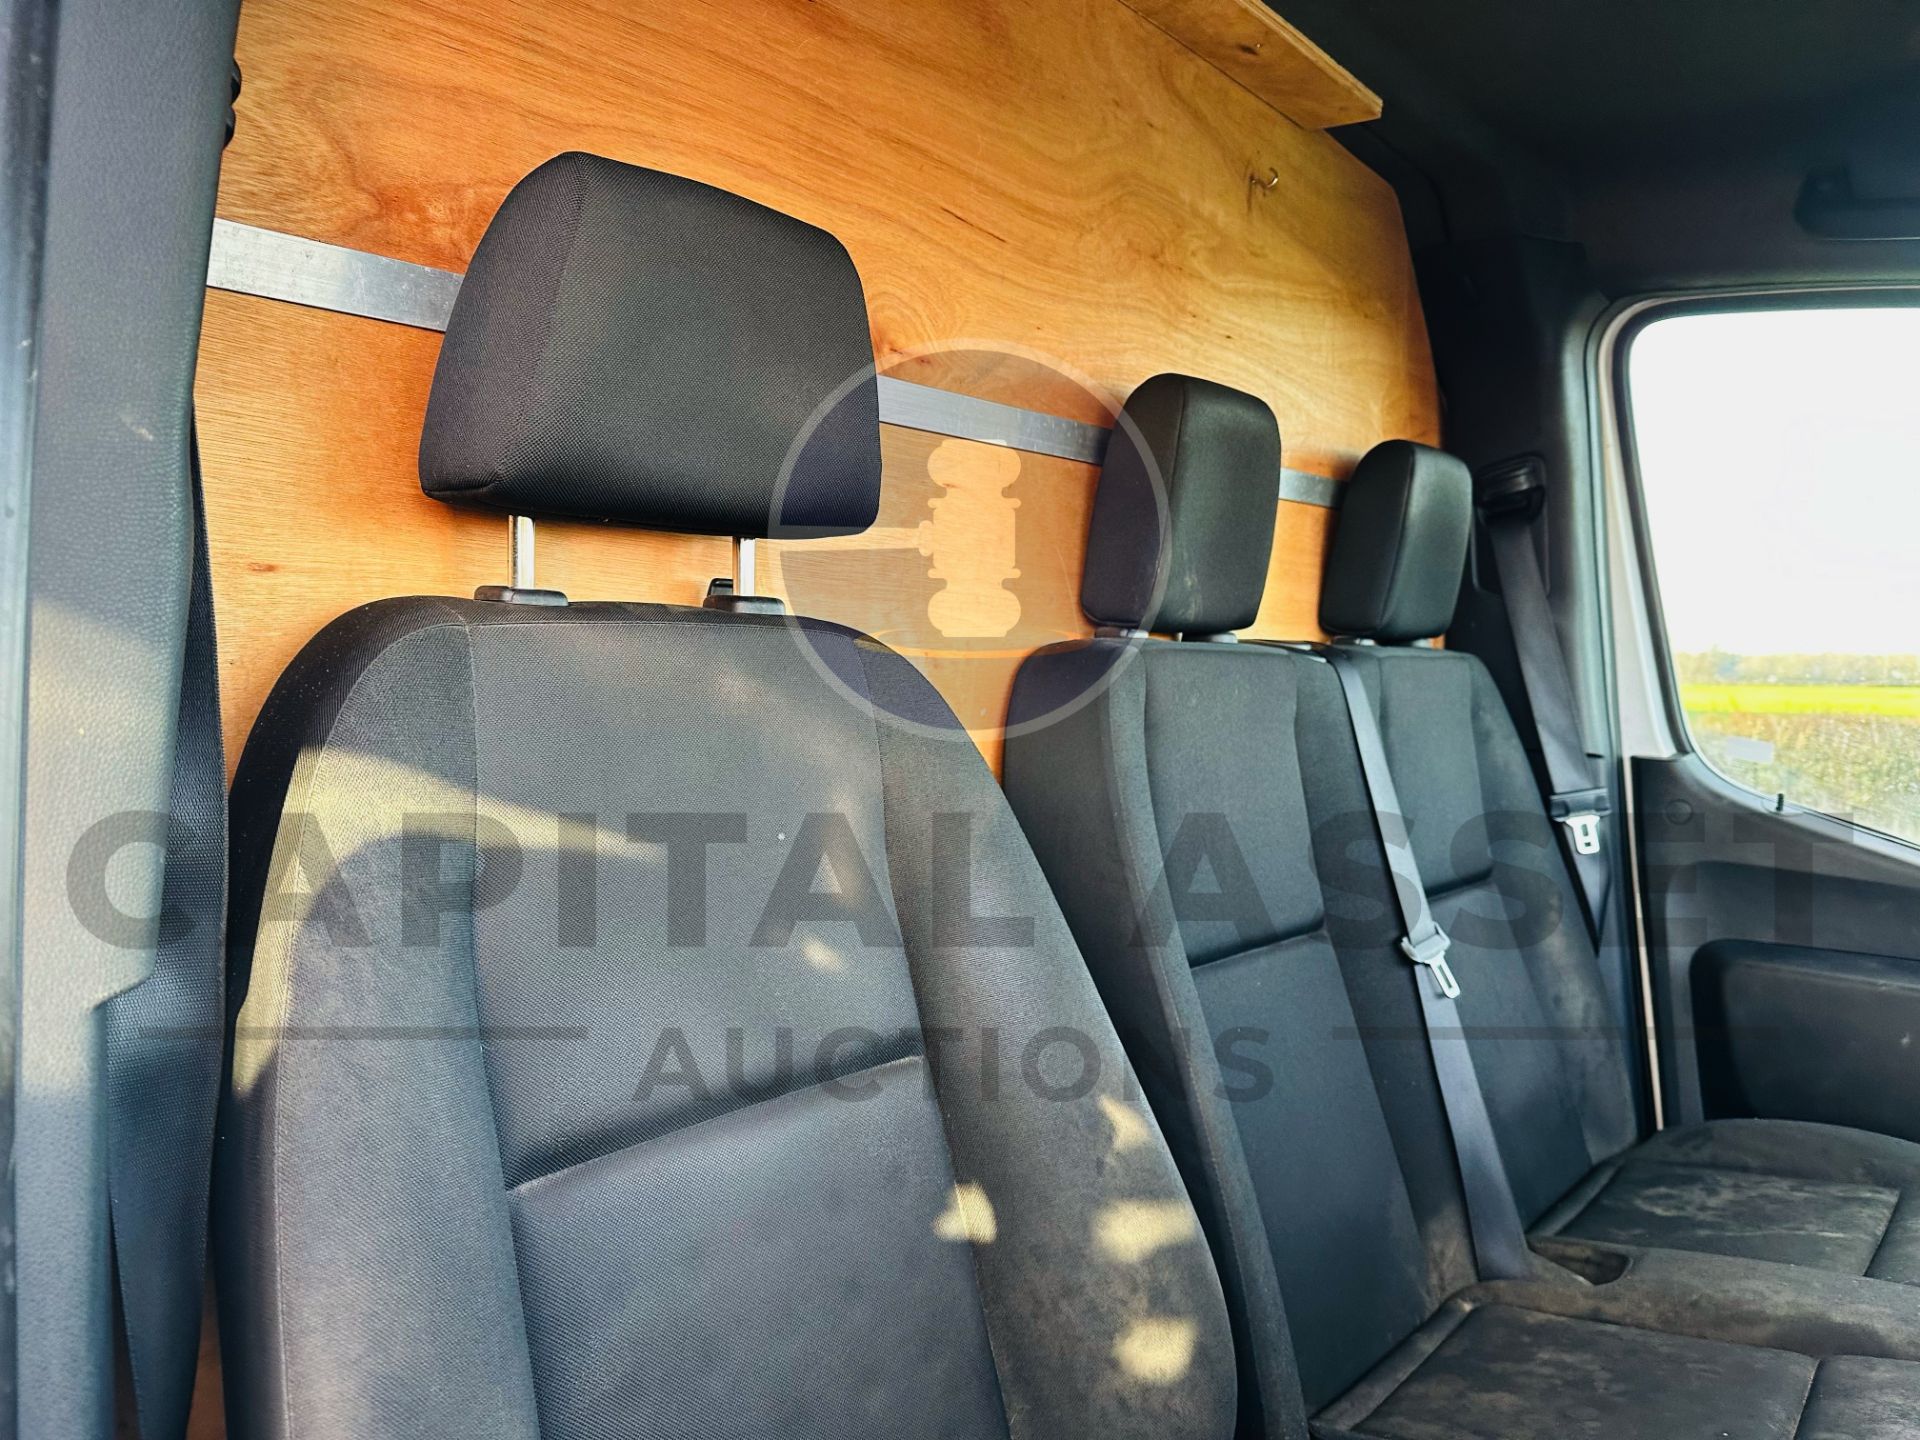 MERCEDES-BENZ SPRINTER 316 CDI *LWB - DOUBLE CAB TIPPER* (2021 - EURO 6) 141 BHP - 6 SPEED (3500 KG) - Image 18 of 28